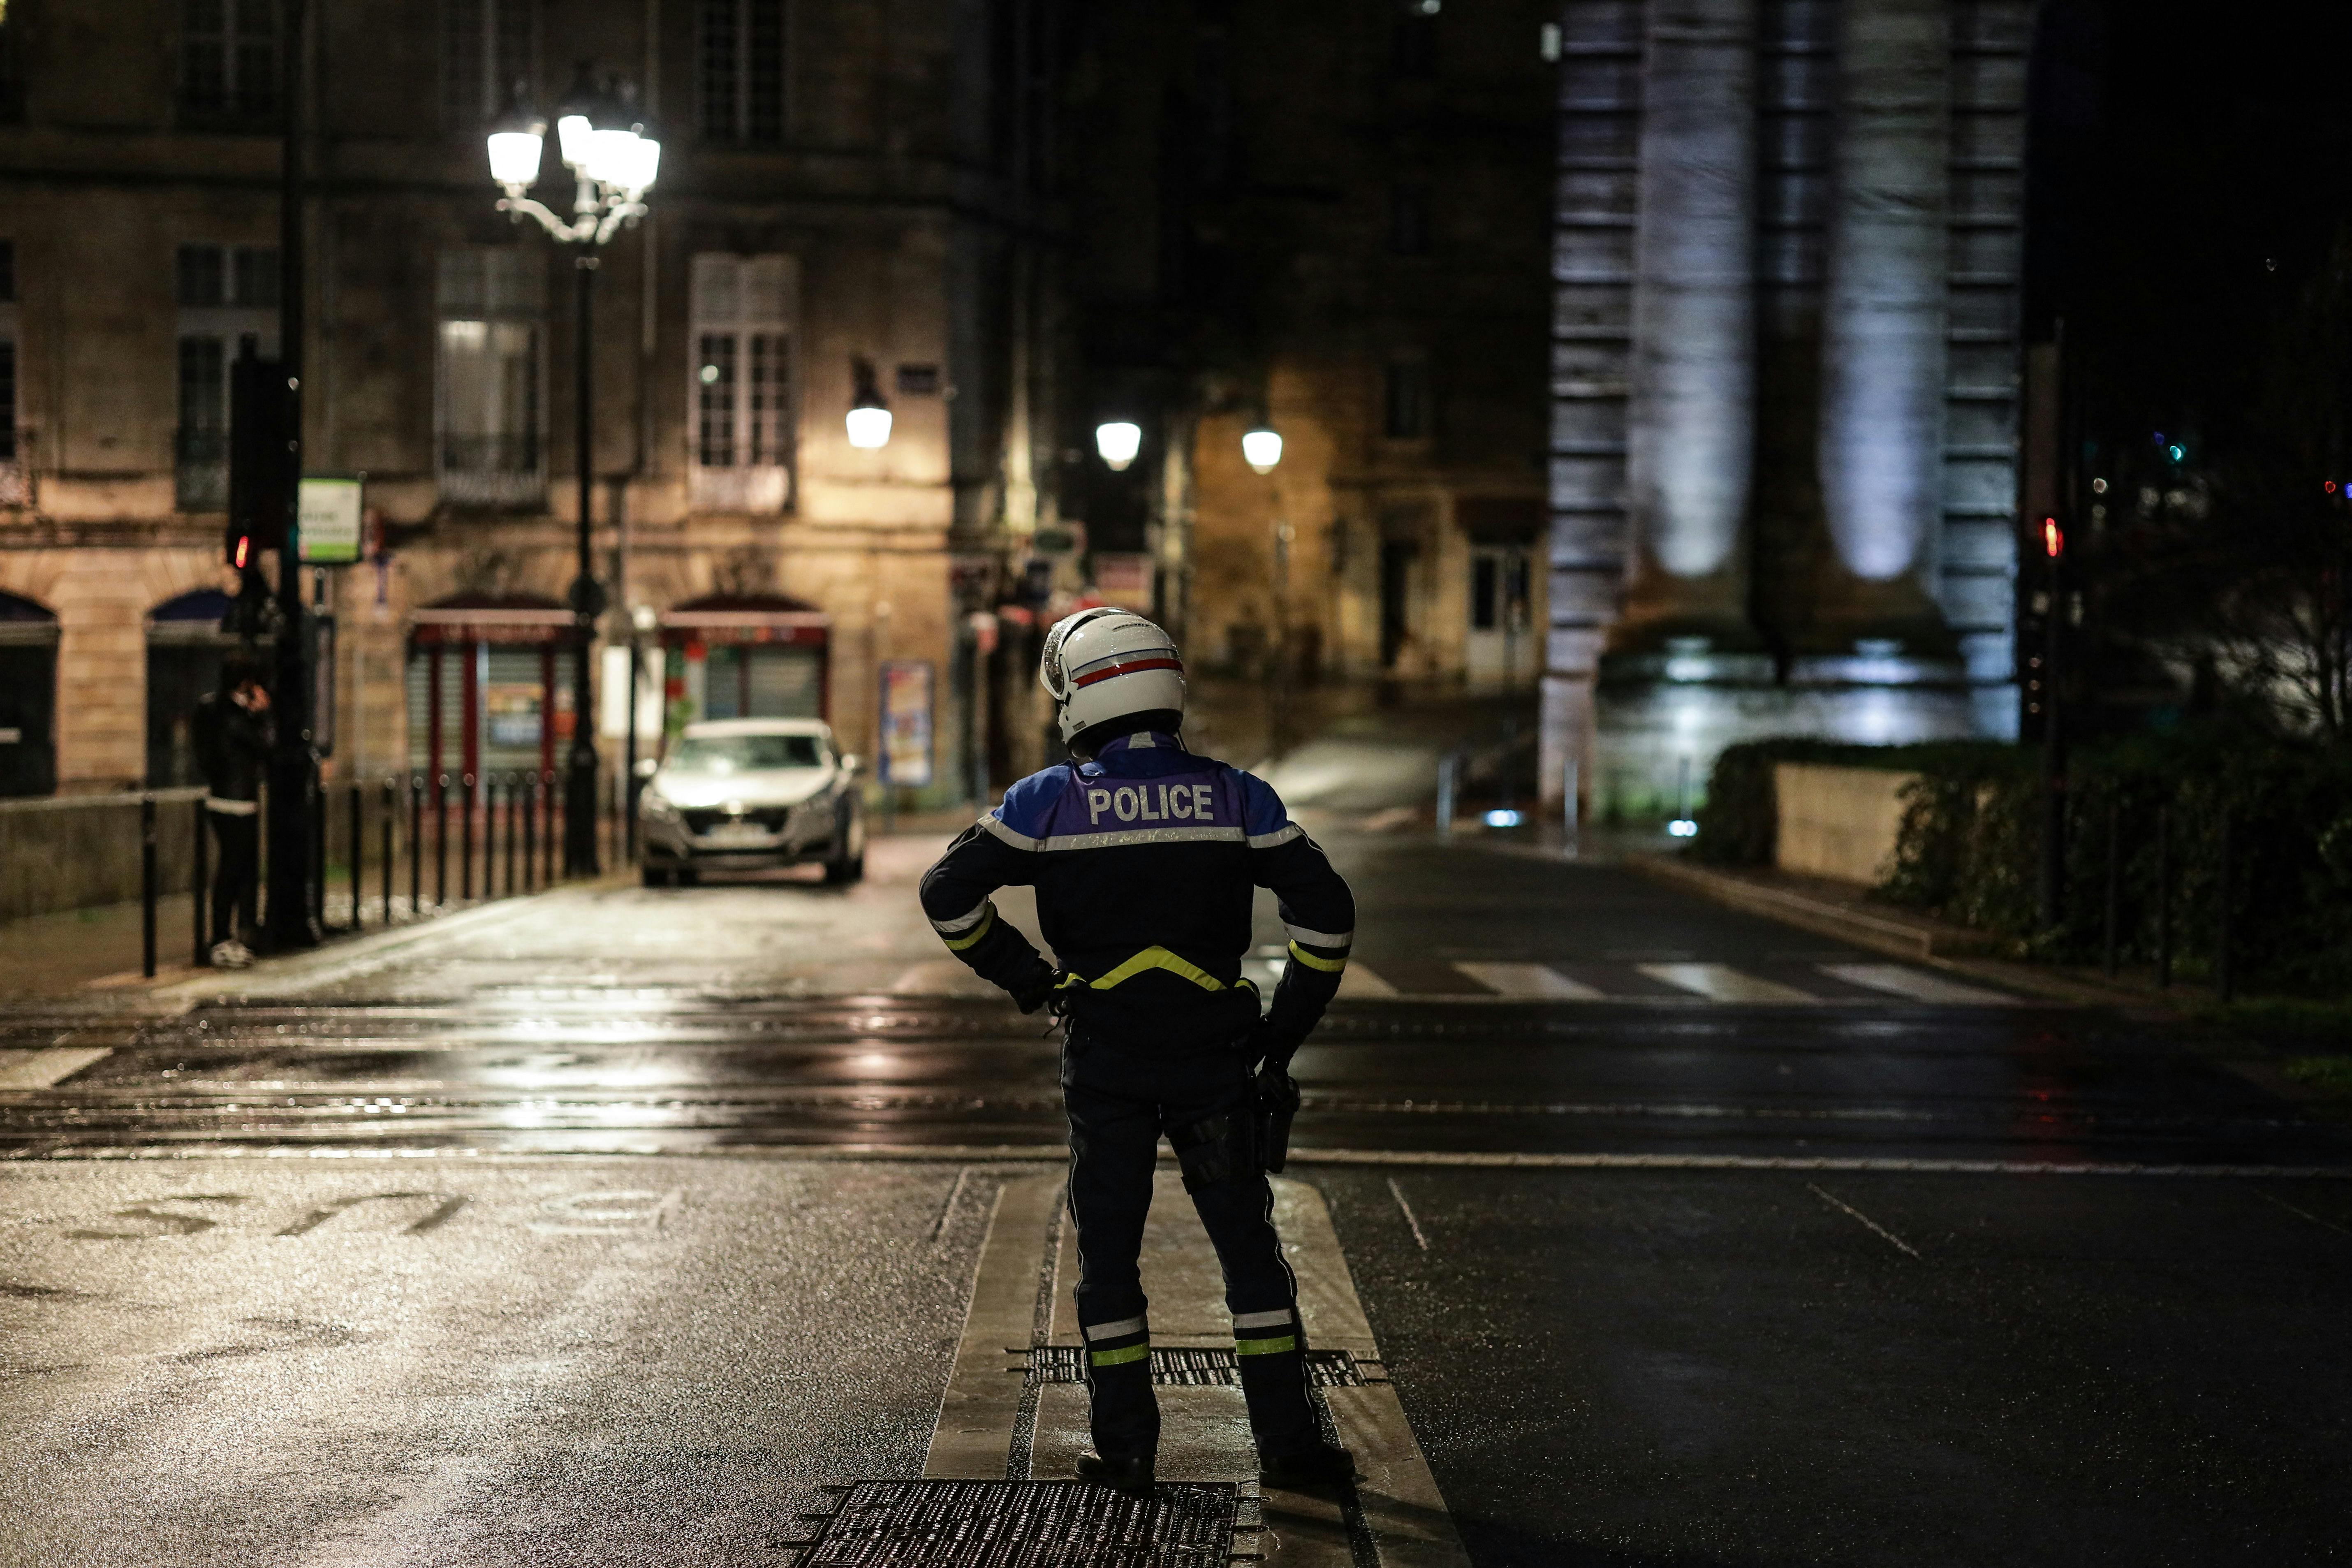 On the eve of New Year's Eve, police checks to check certificates during curfew hours are stepped up. This year, a curfew was introduced to prevent the spread of Covid-19 in France during New Year's Eve. In Bordeaux, December 30, 2020. Photo by Thibaud Moritz/ABACAPRESS.COM
